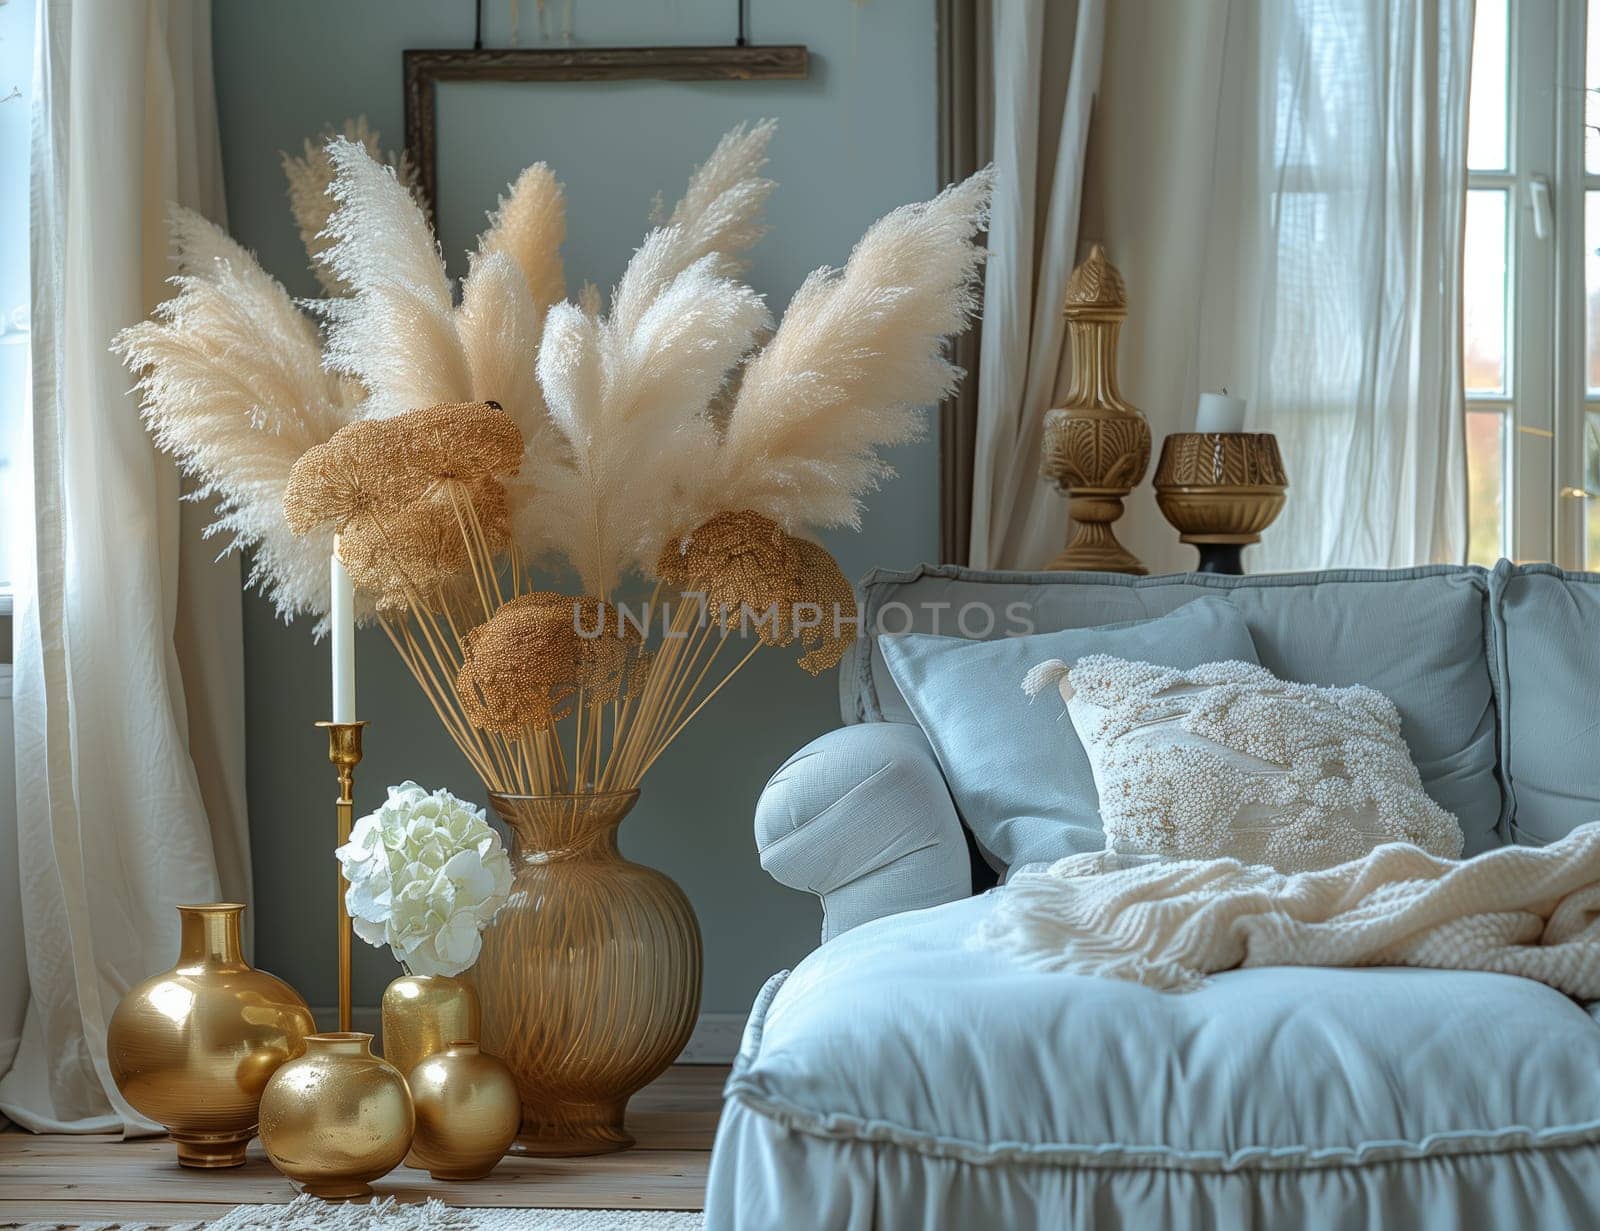 A cozy living room in a house with a comfortable couch, artful vases, flickering candles, and elegant pampas grass. Wooden accents and pillows add warmth to the space